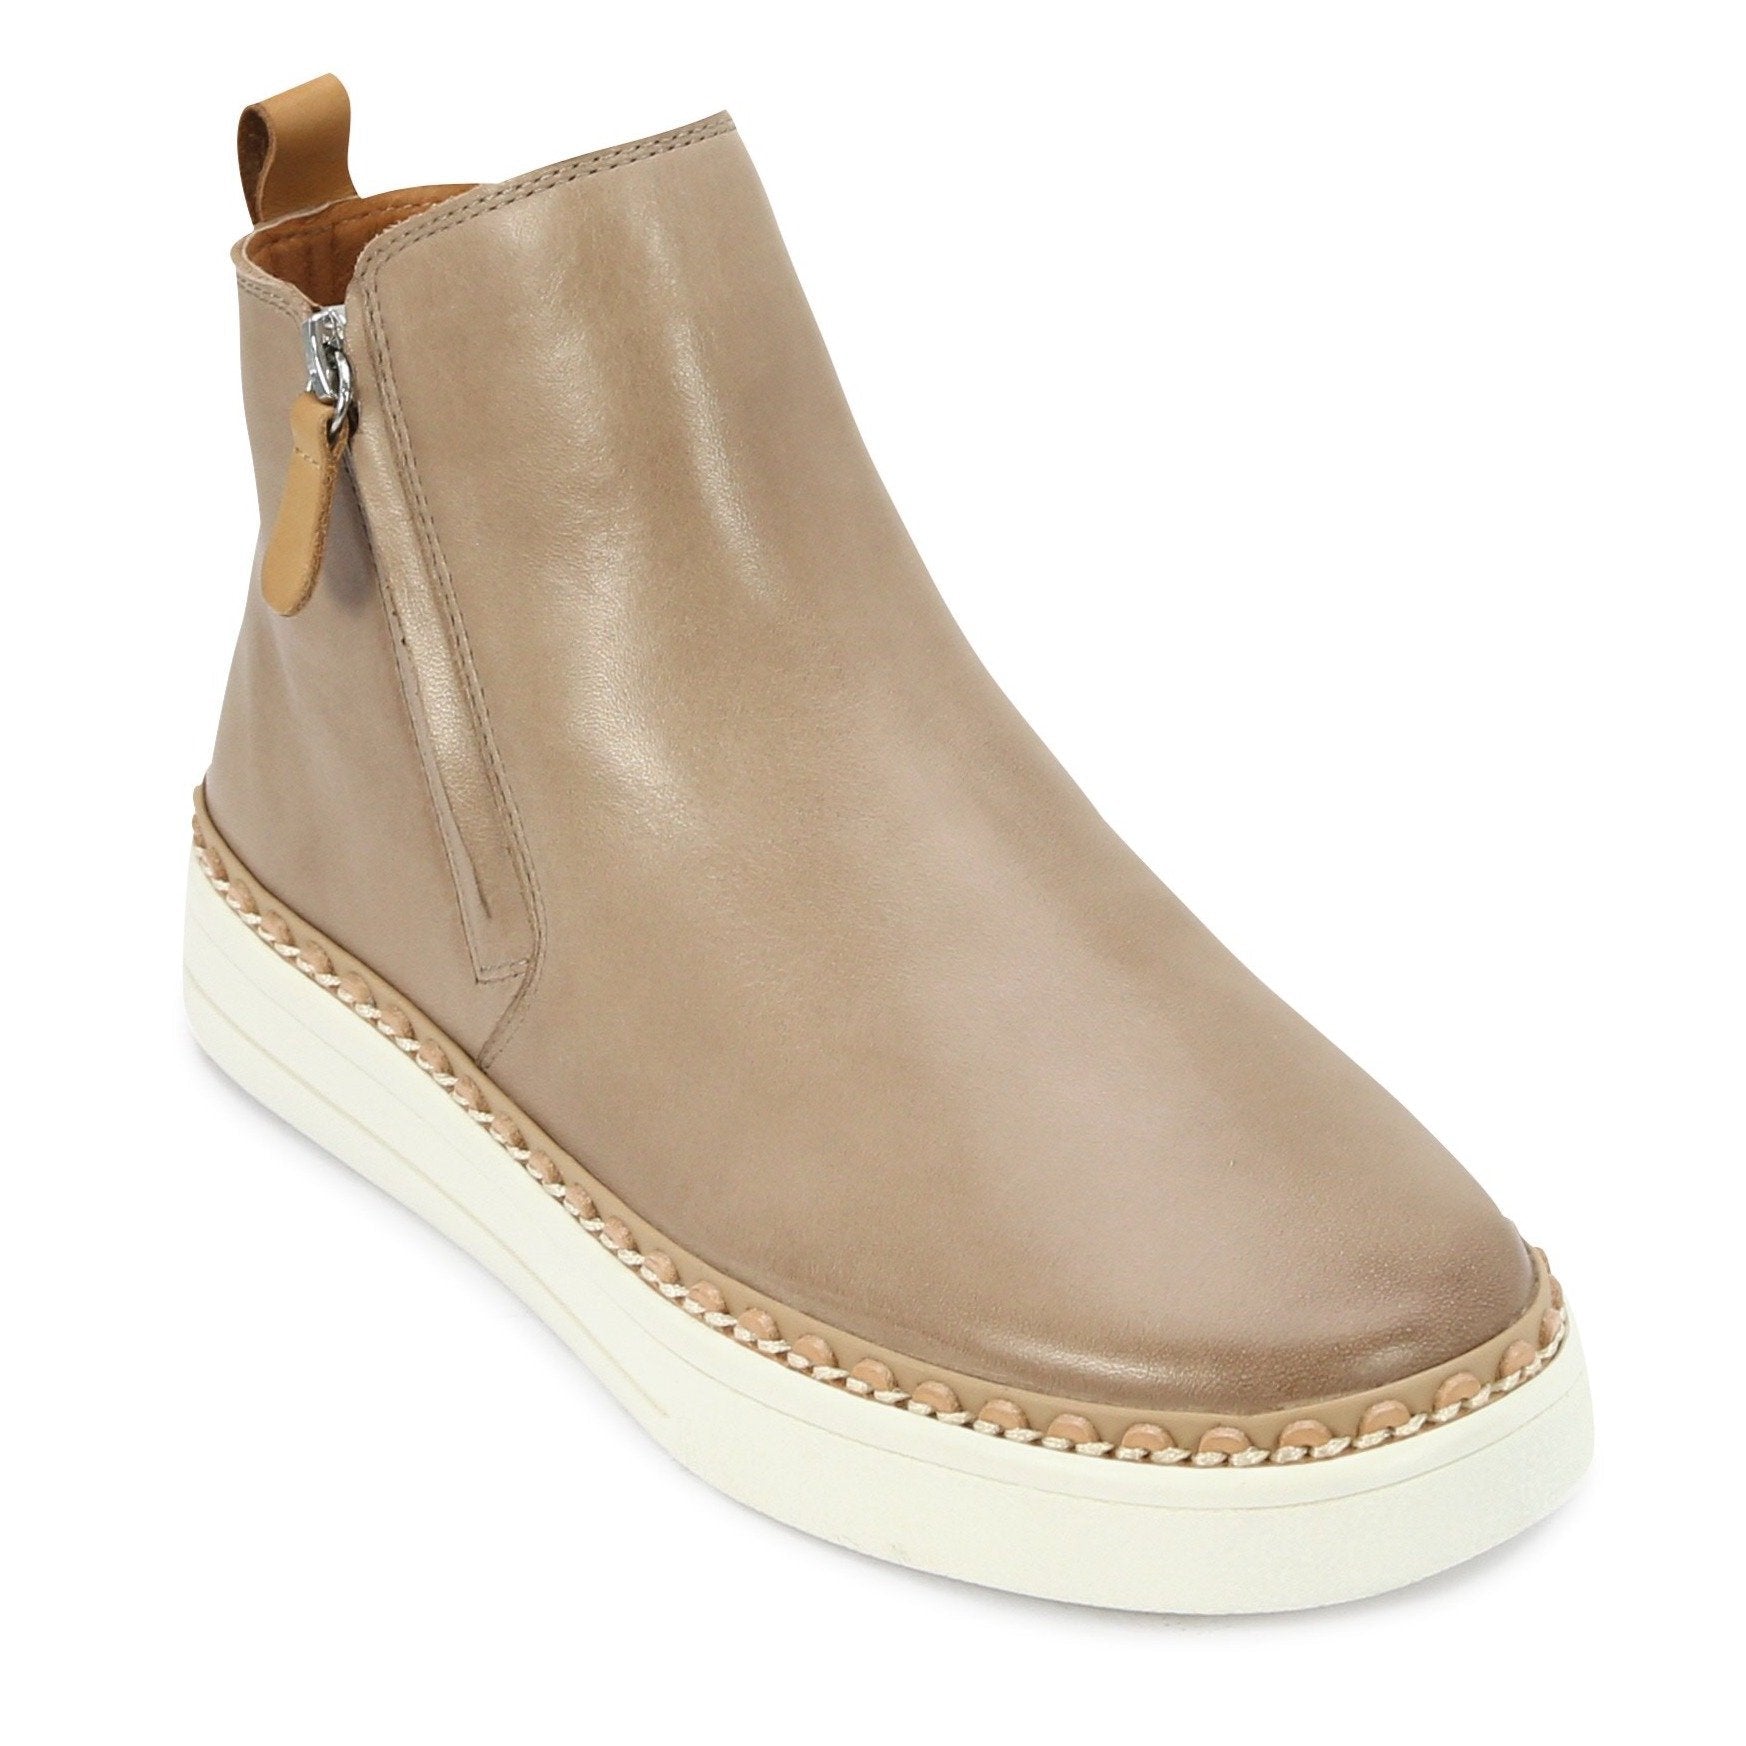 MOROCCAN - EOS Footwear - High Sneakers #color_Taupe